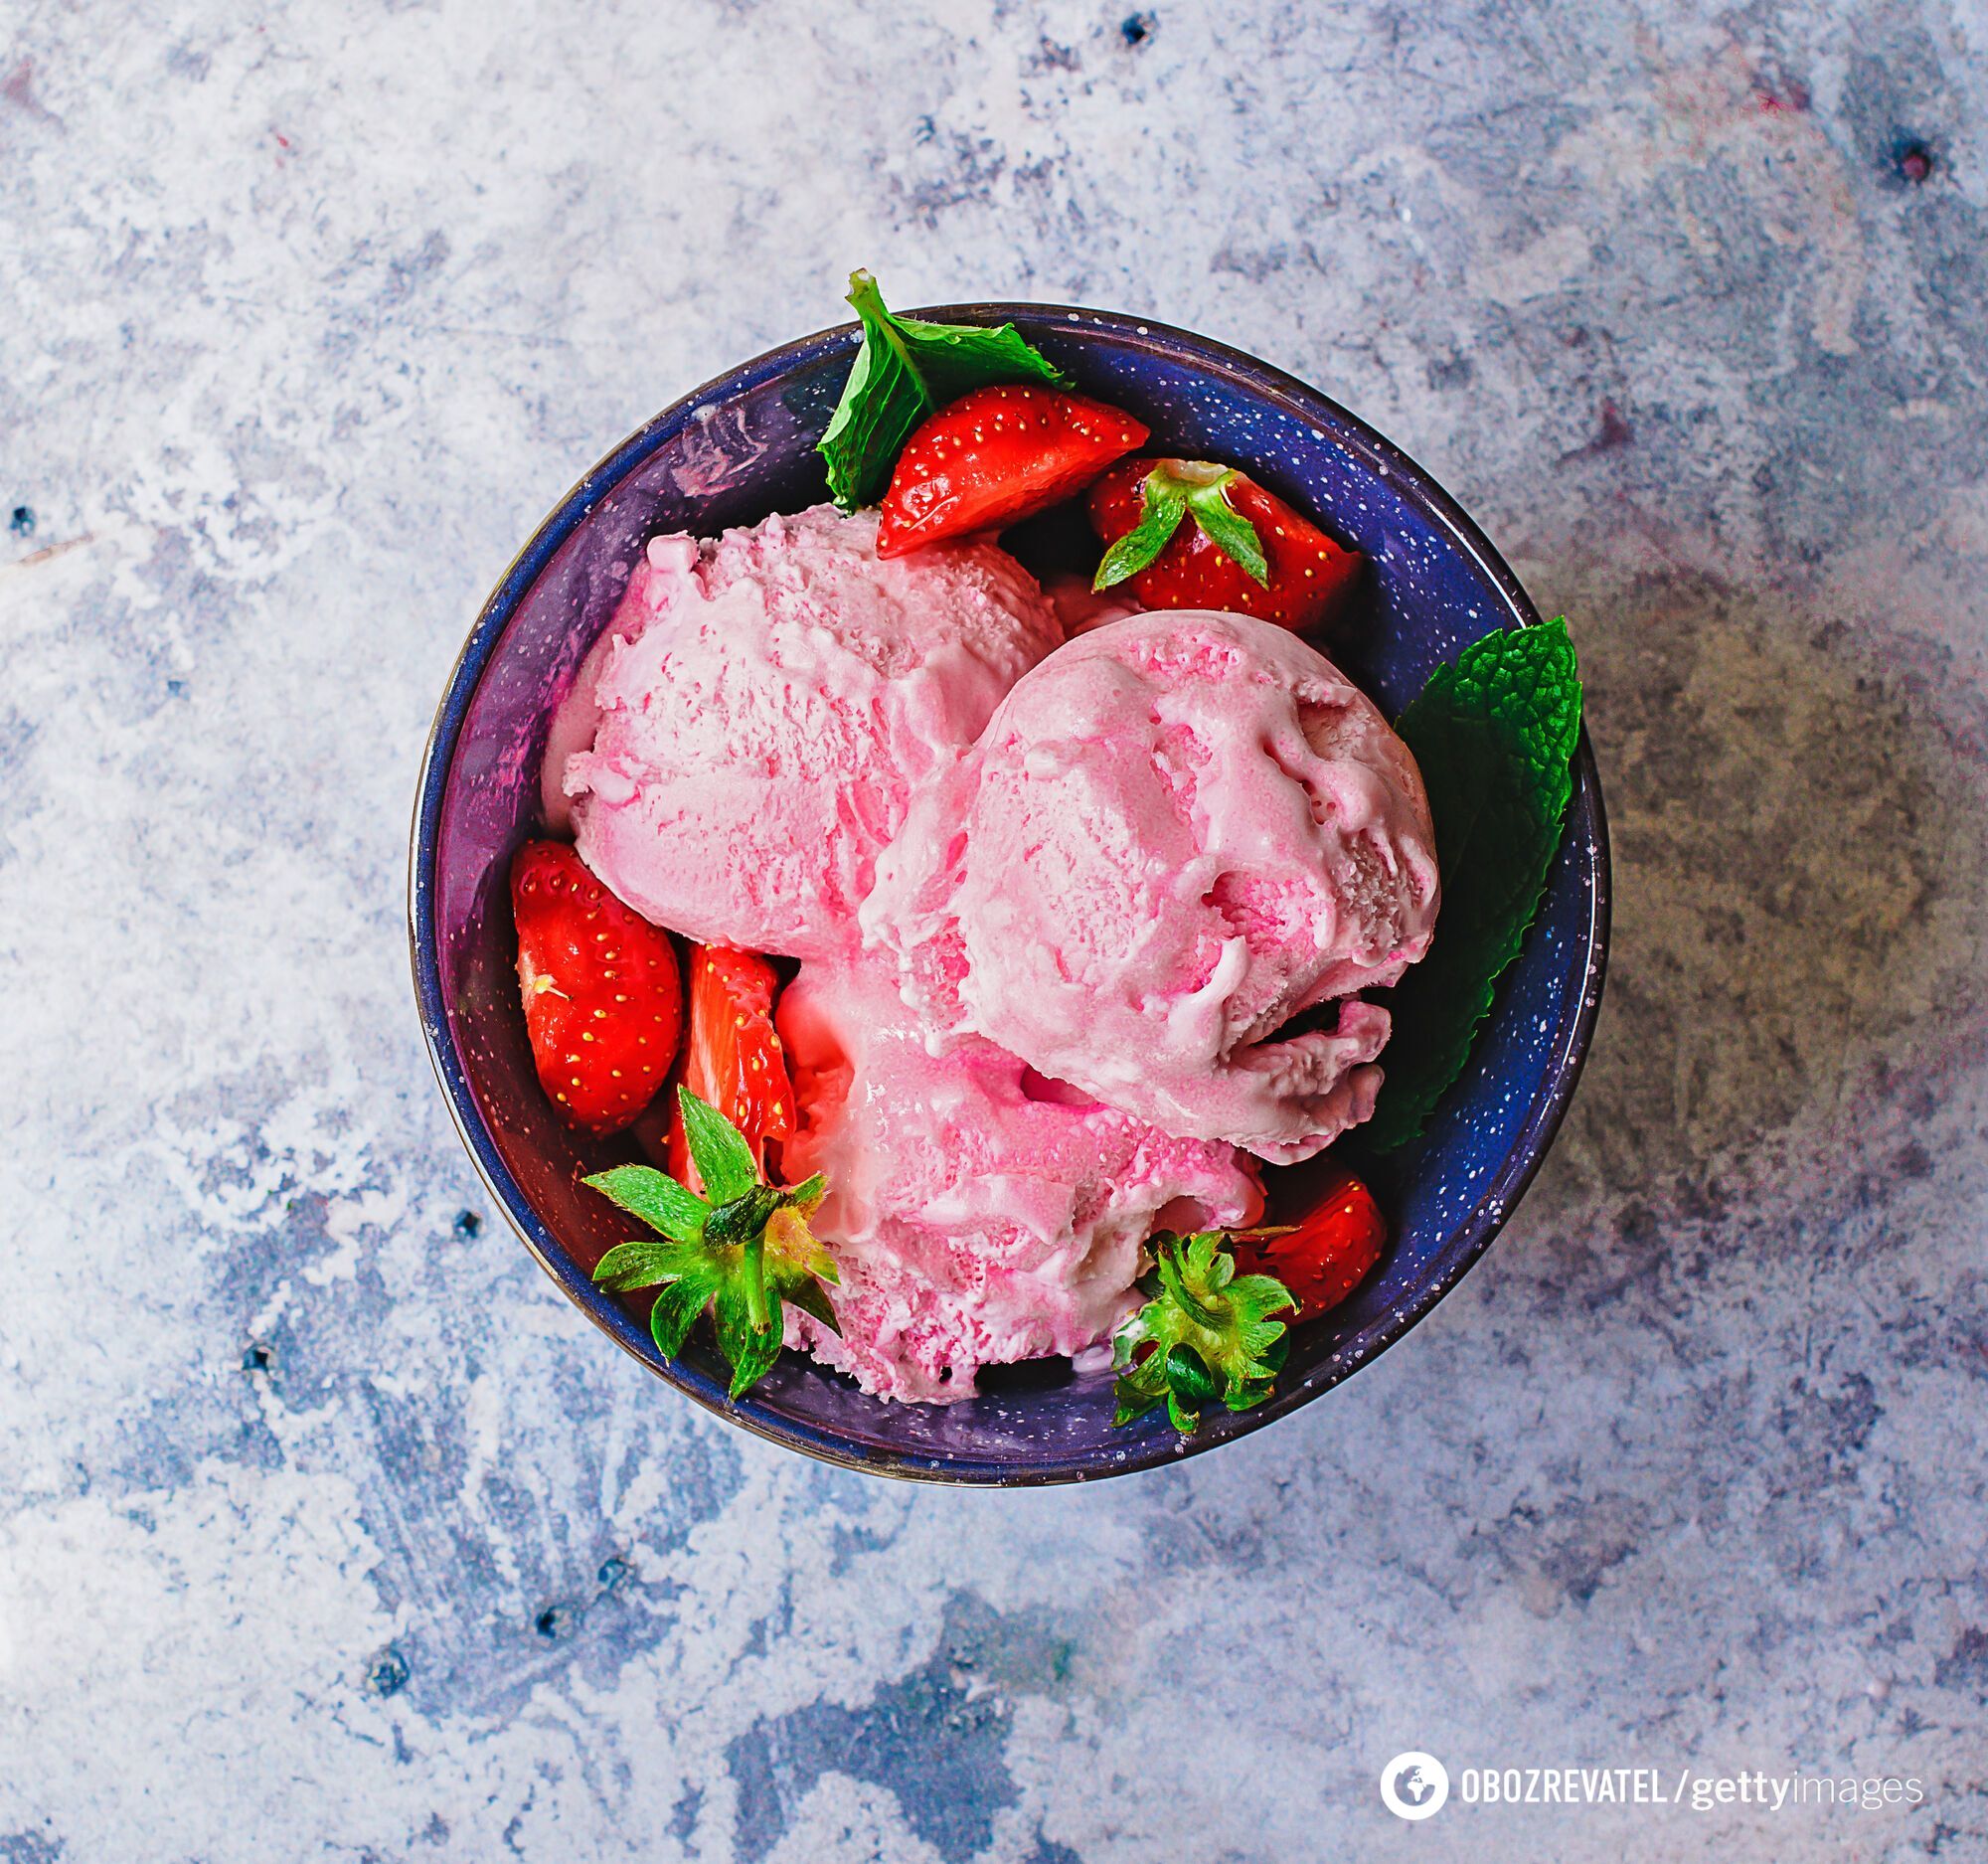 How to make delicious berry ice cream at home